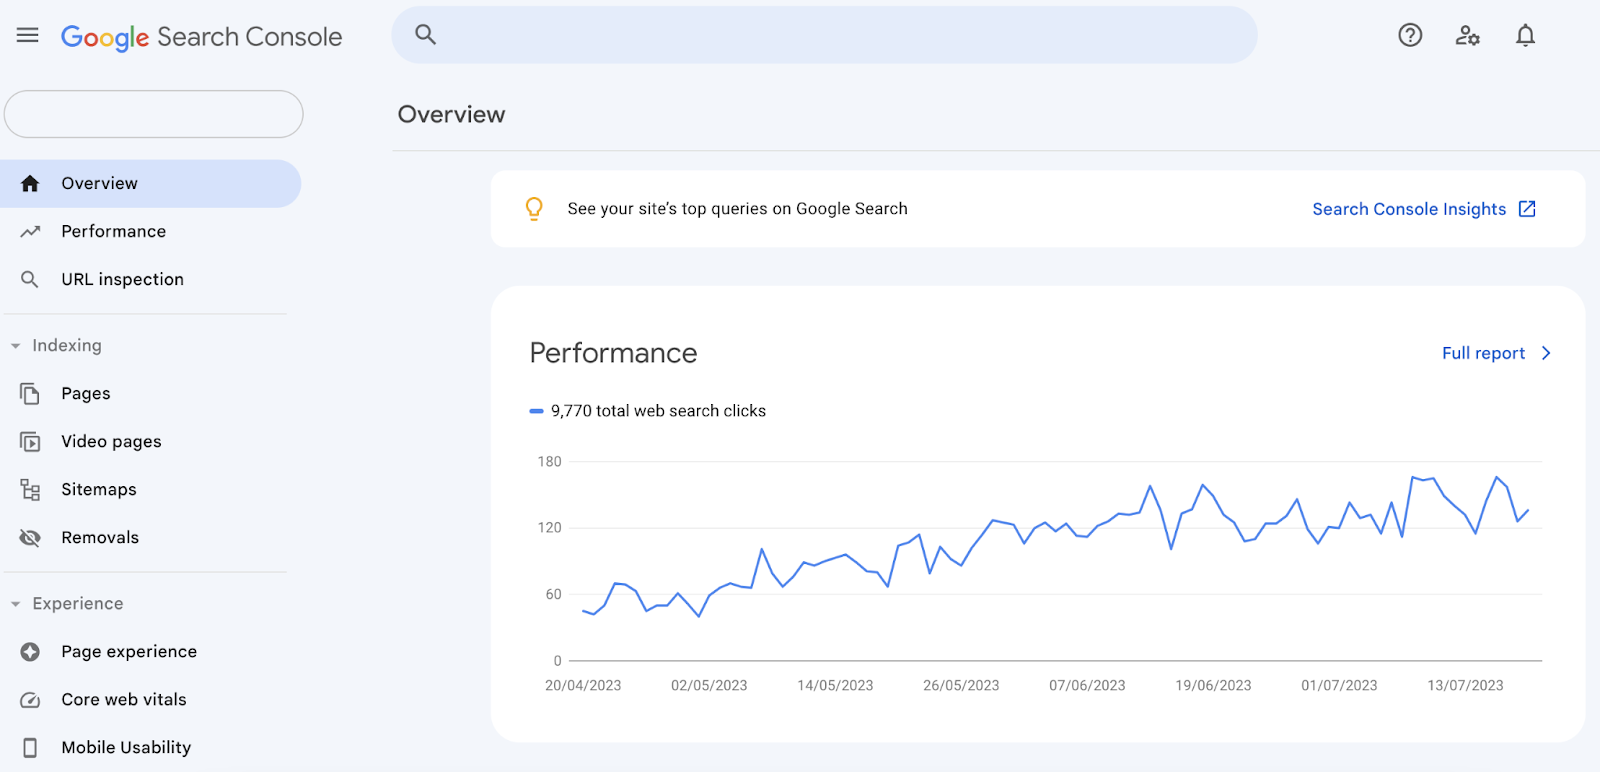 Google Search Console performance overview graph